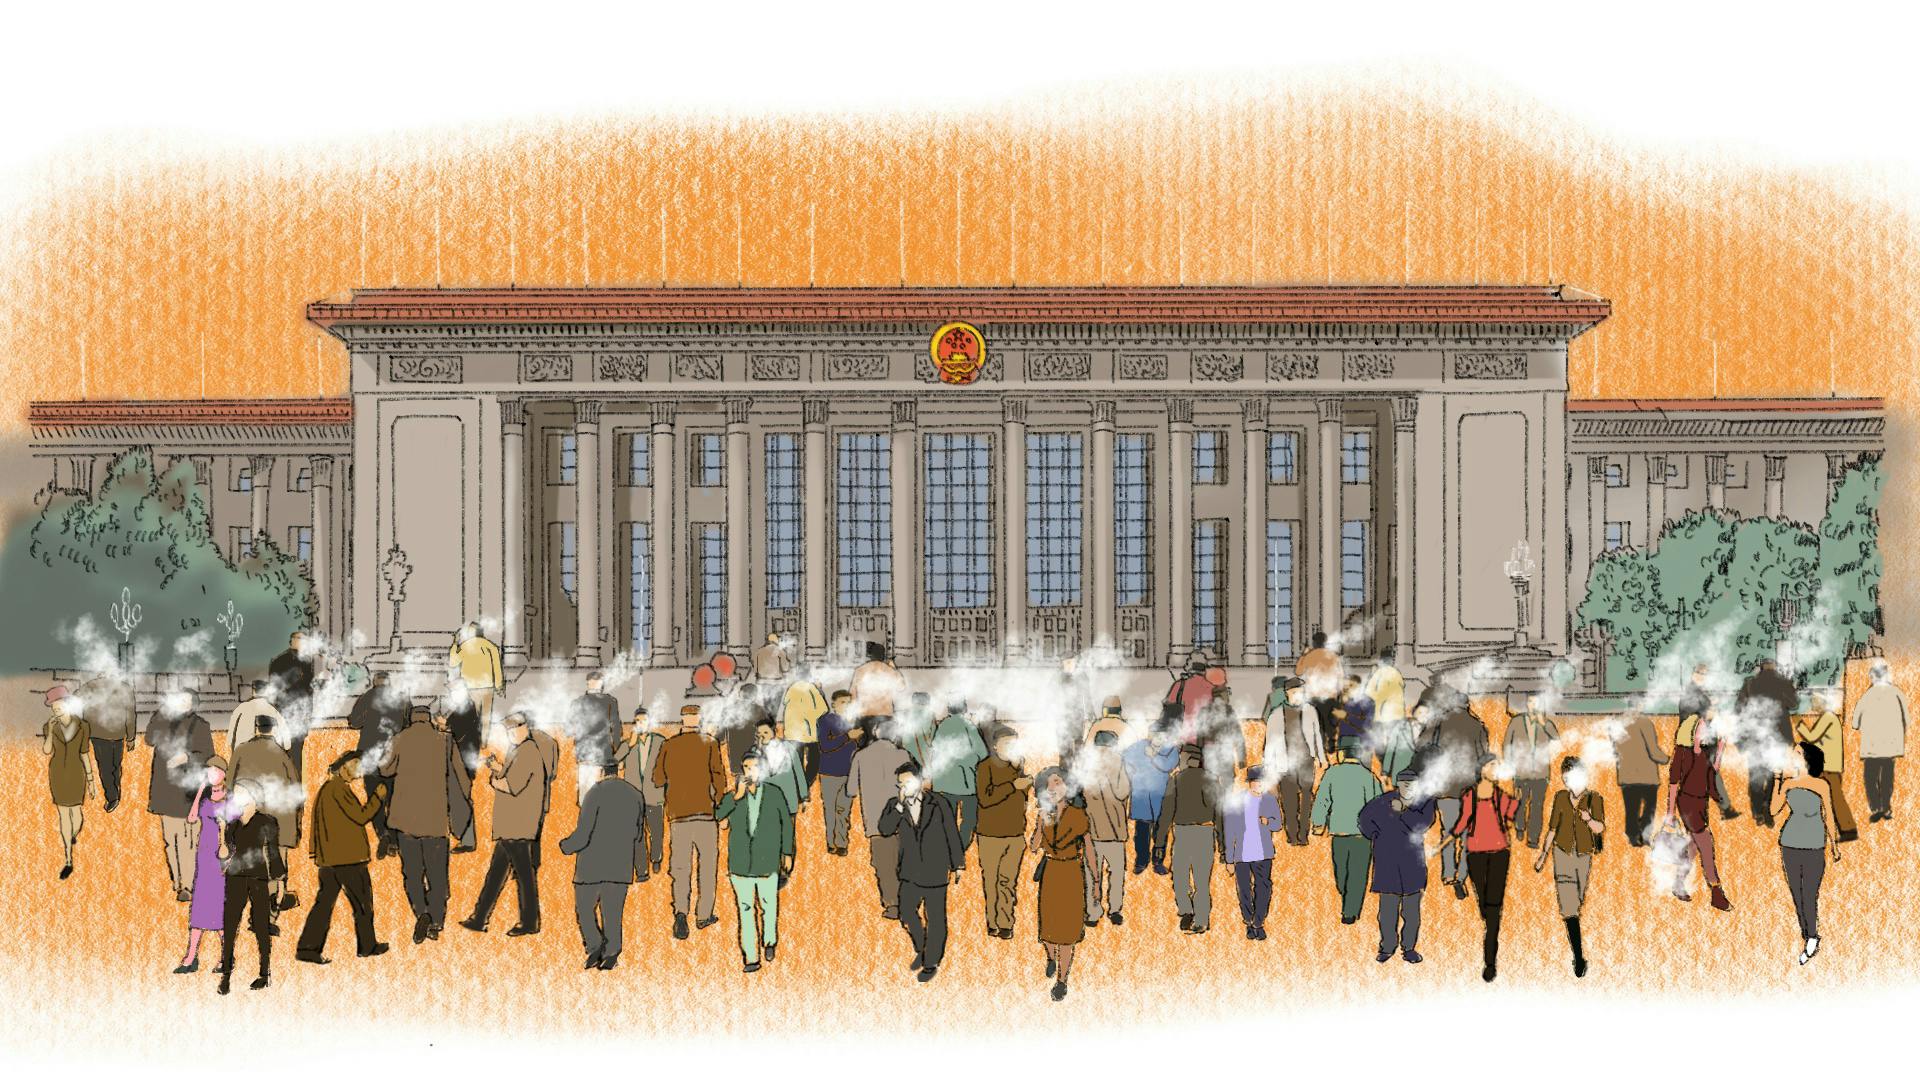 Illustration of smokers outside China's Great Hall of the People